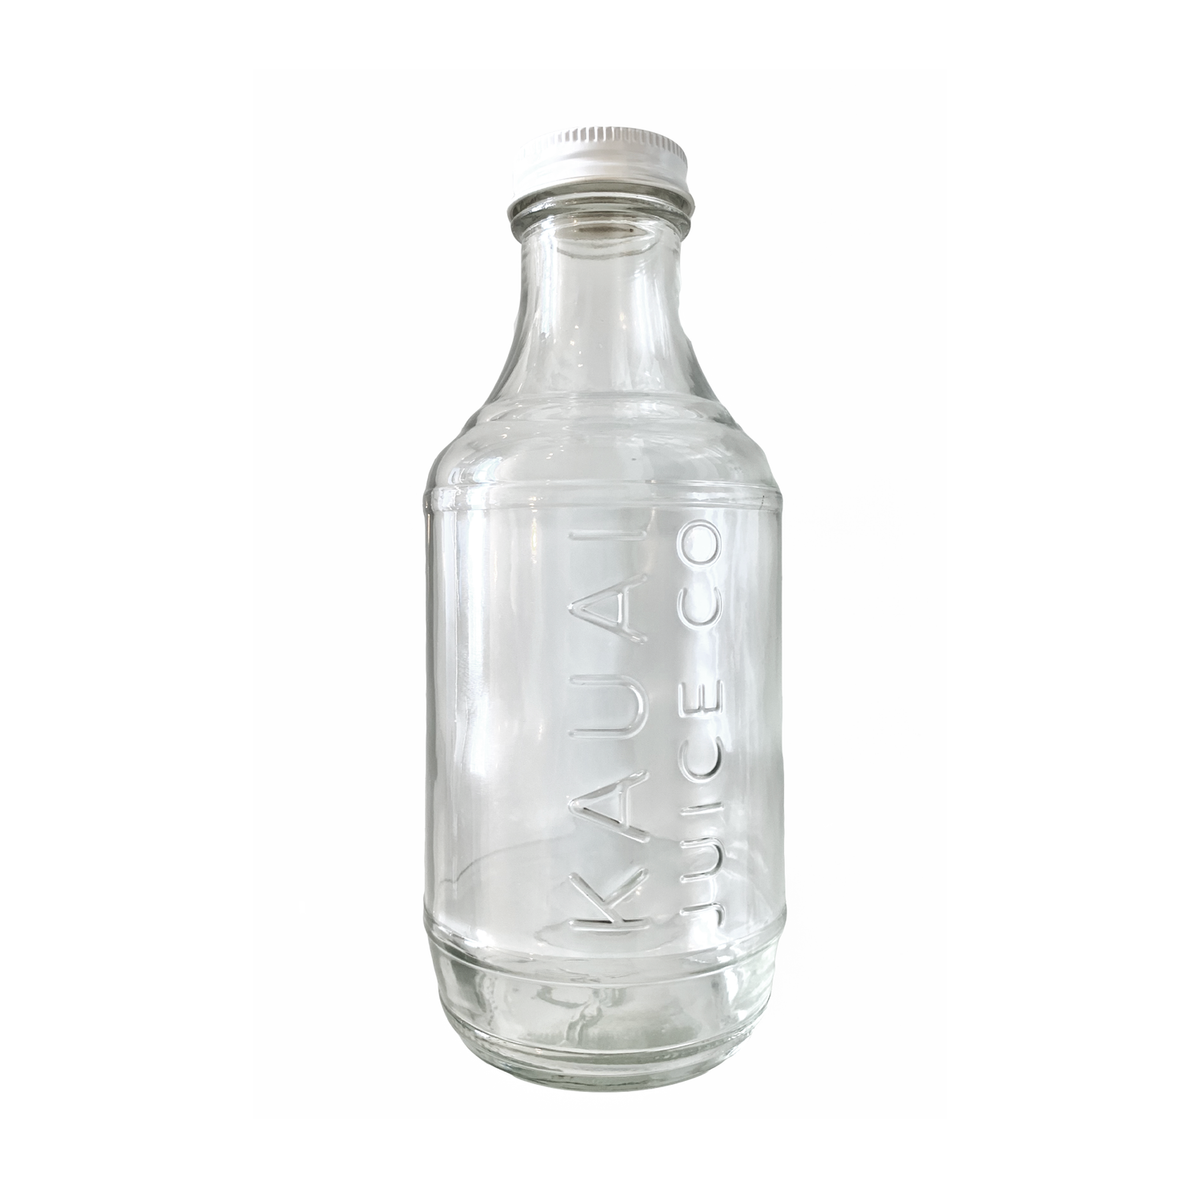 2oz Glass Bottles,Small Glass Juice Bottles with Black Lids for